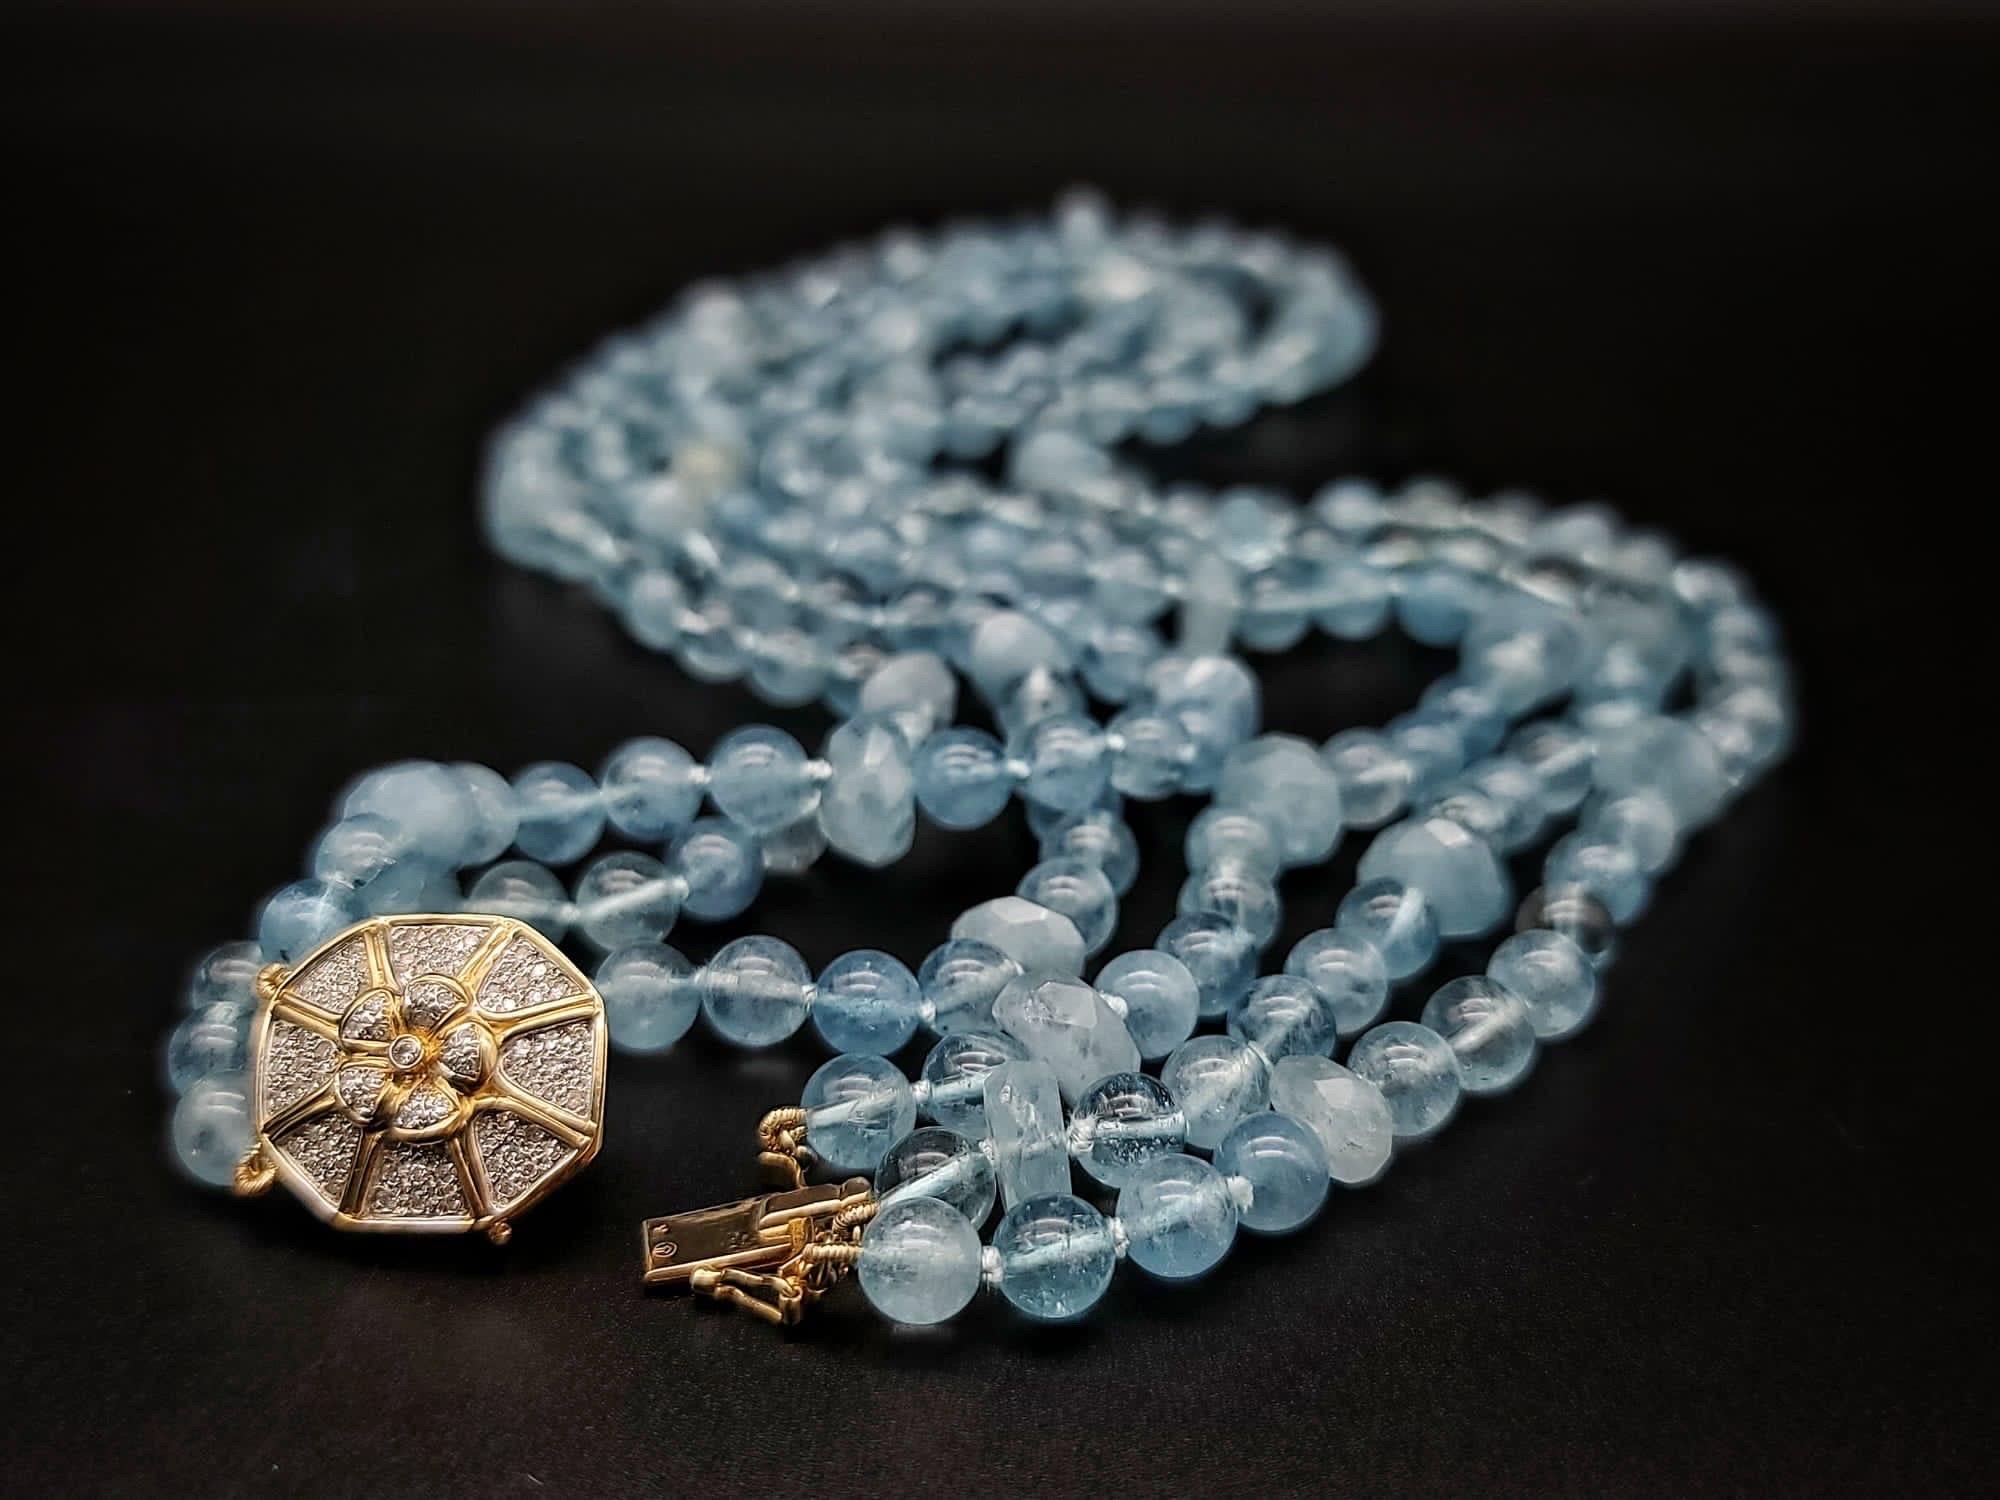 A.Jeschel AAA Aquamarine necklace with a 14k Gold Diamond clasp. 1